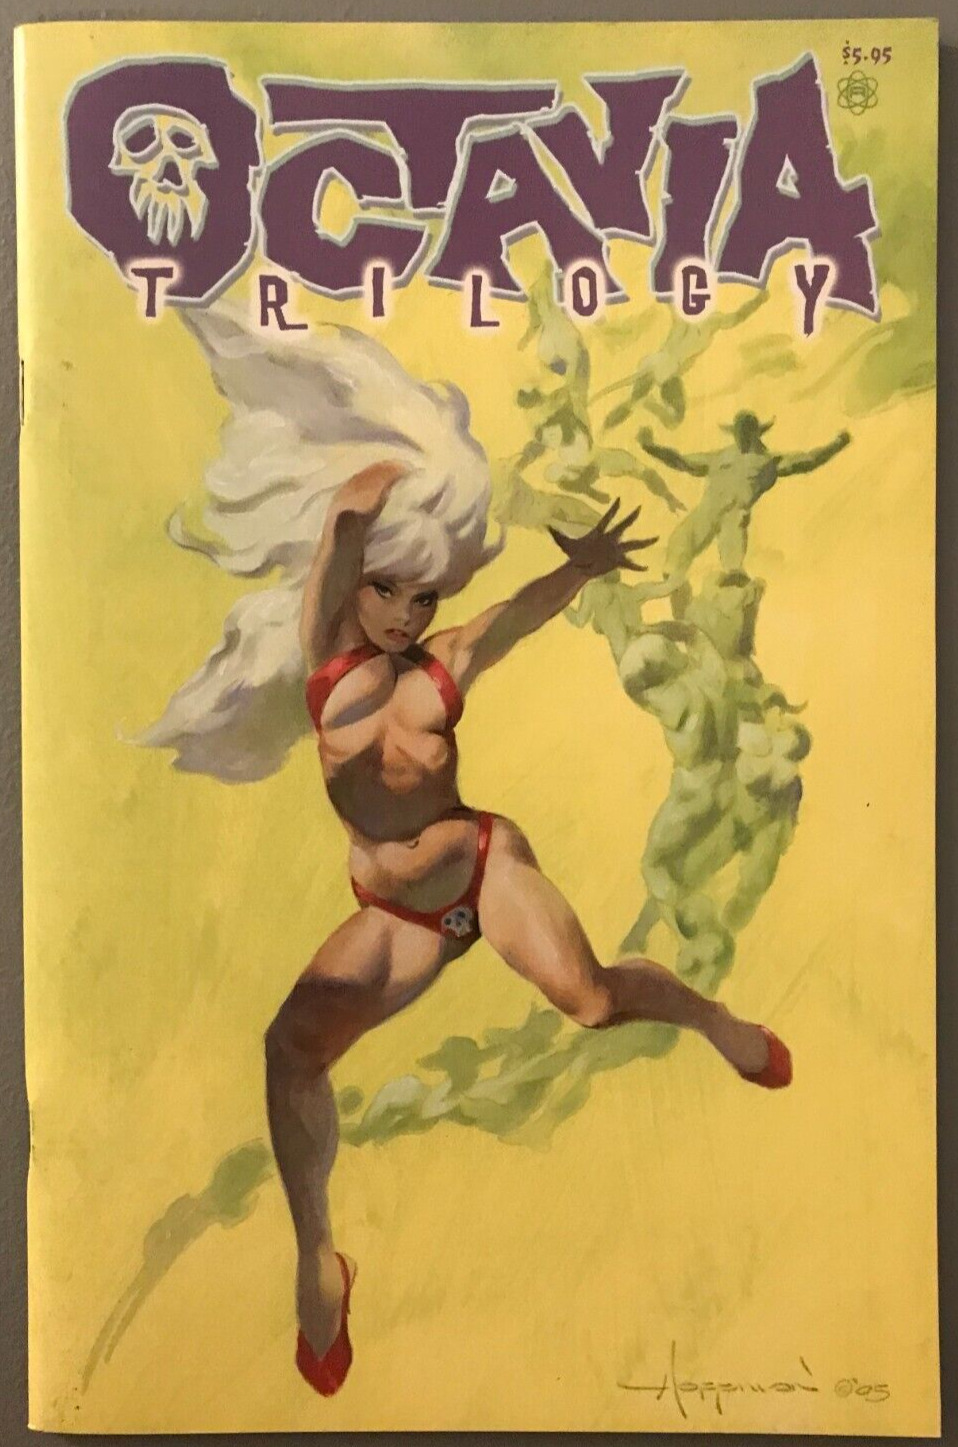 Octavia Trilogy #1 By Mike Hoffman Gothic Femme Fatale Antimatter NM/M 2005